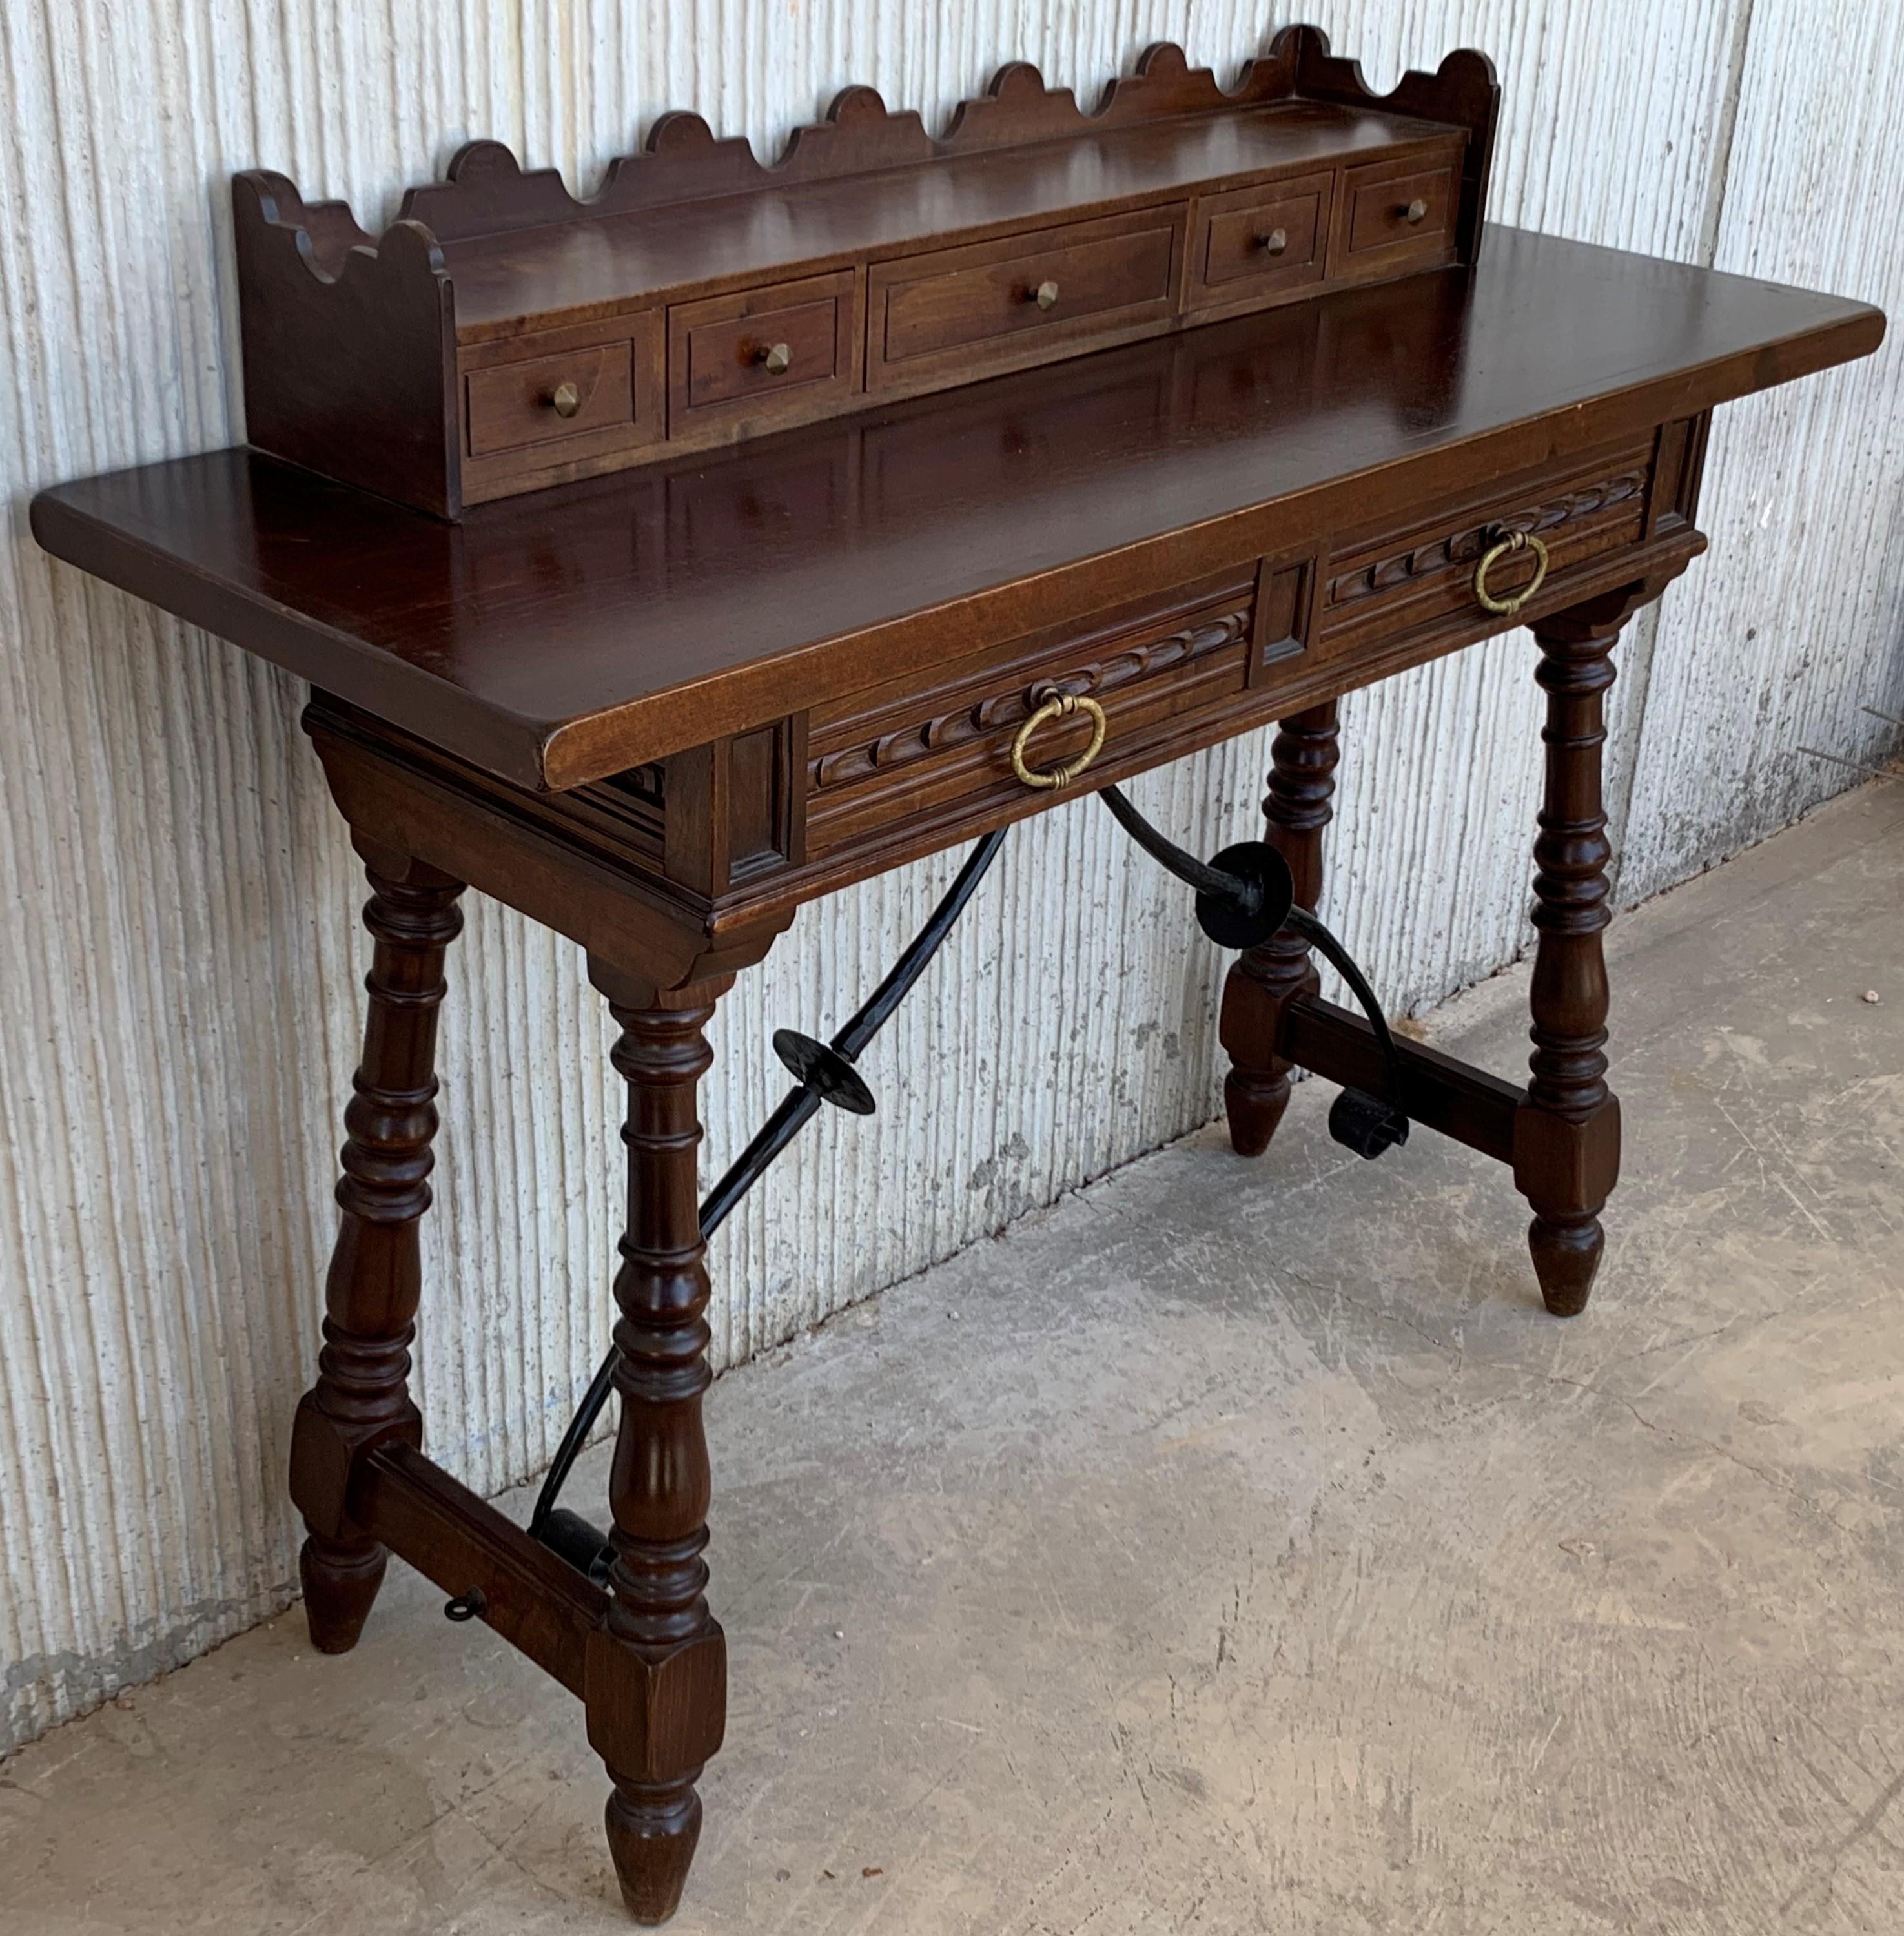 19th century Catalan Spanish lady desk or console table in carved walnut & iron stretcher with five up drawers and two in the base table.
Very heavy and resistant, ready for use.

Measures: Height to the top : 36.61in
Height to the table: